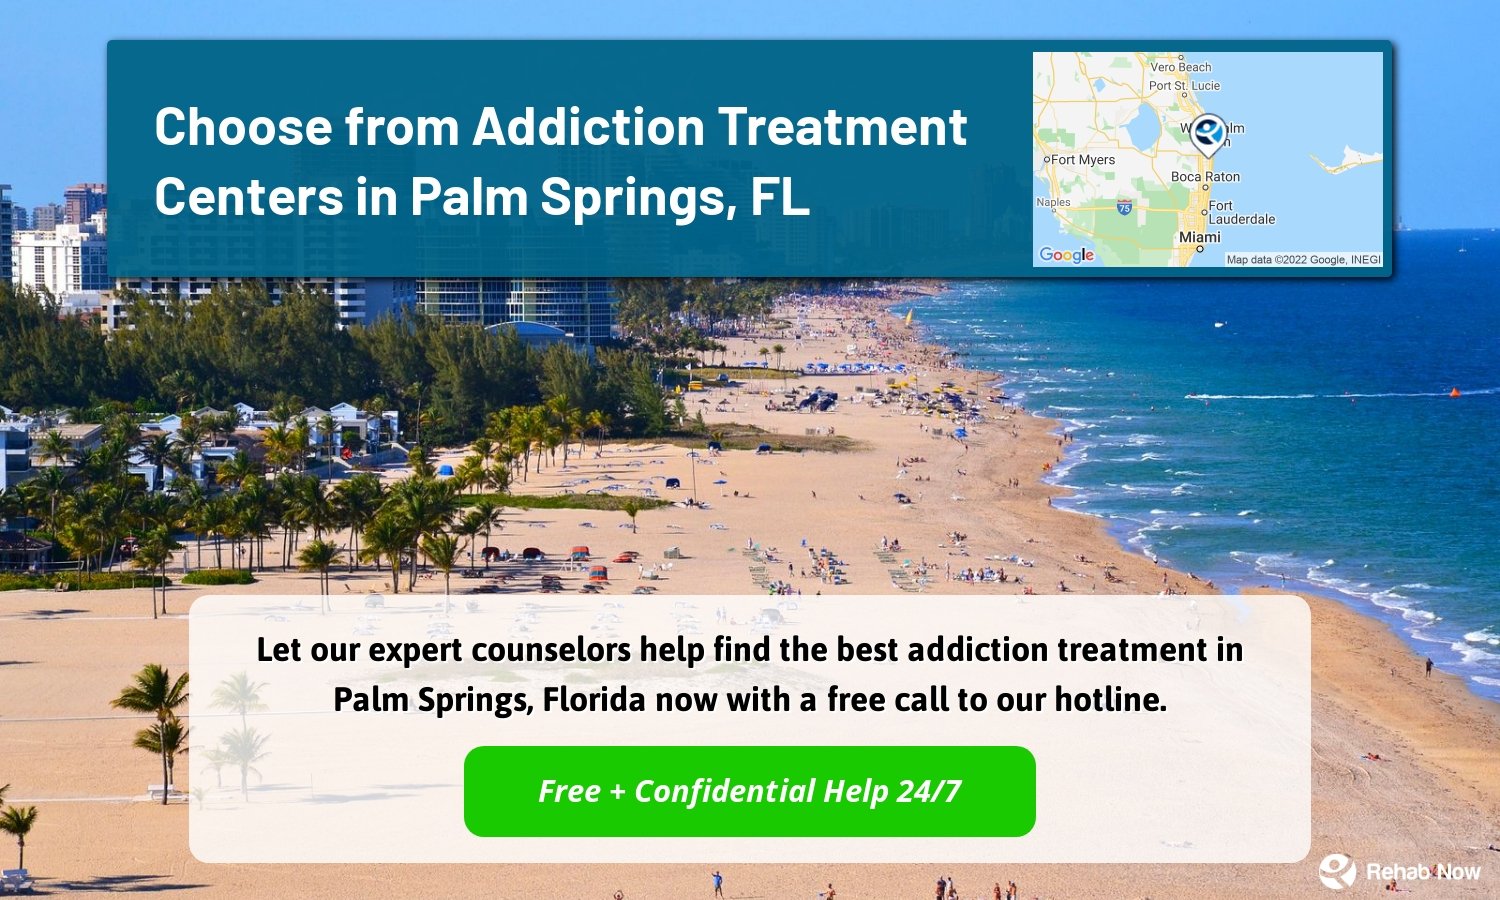 Let our expert counselors help find the best addiction treatment in Palm Springs, Florida now with a free call to our hotline.